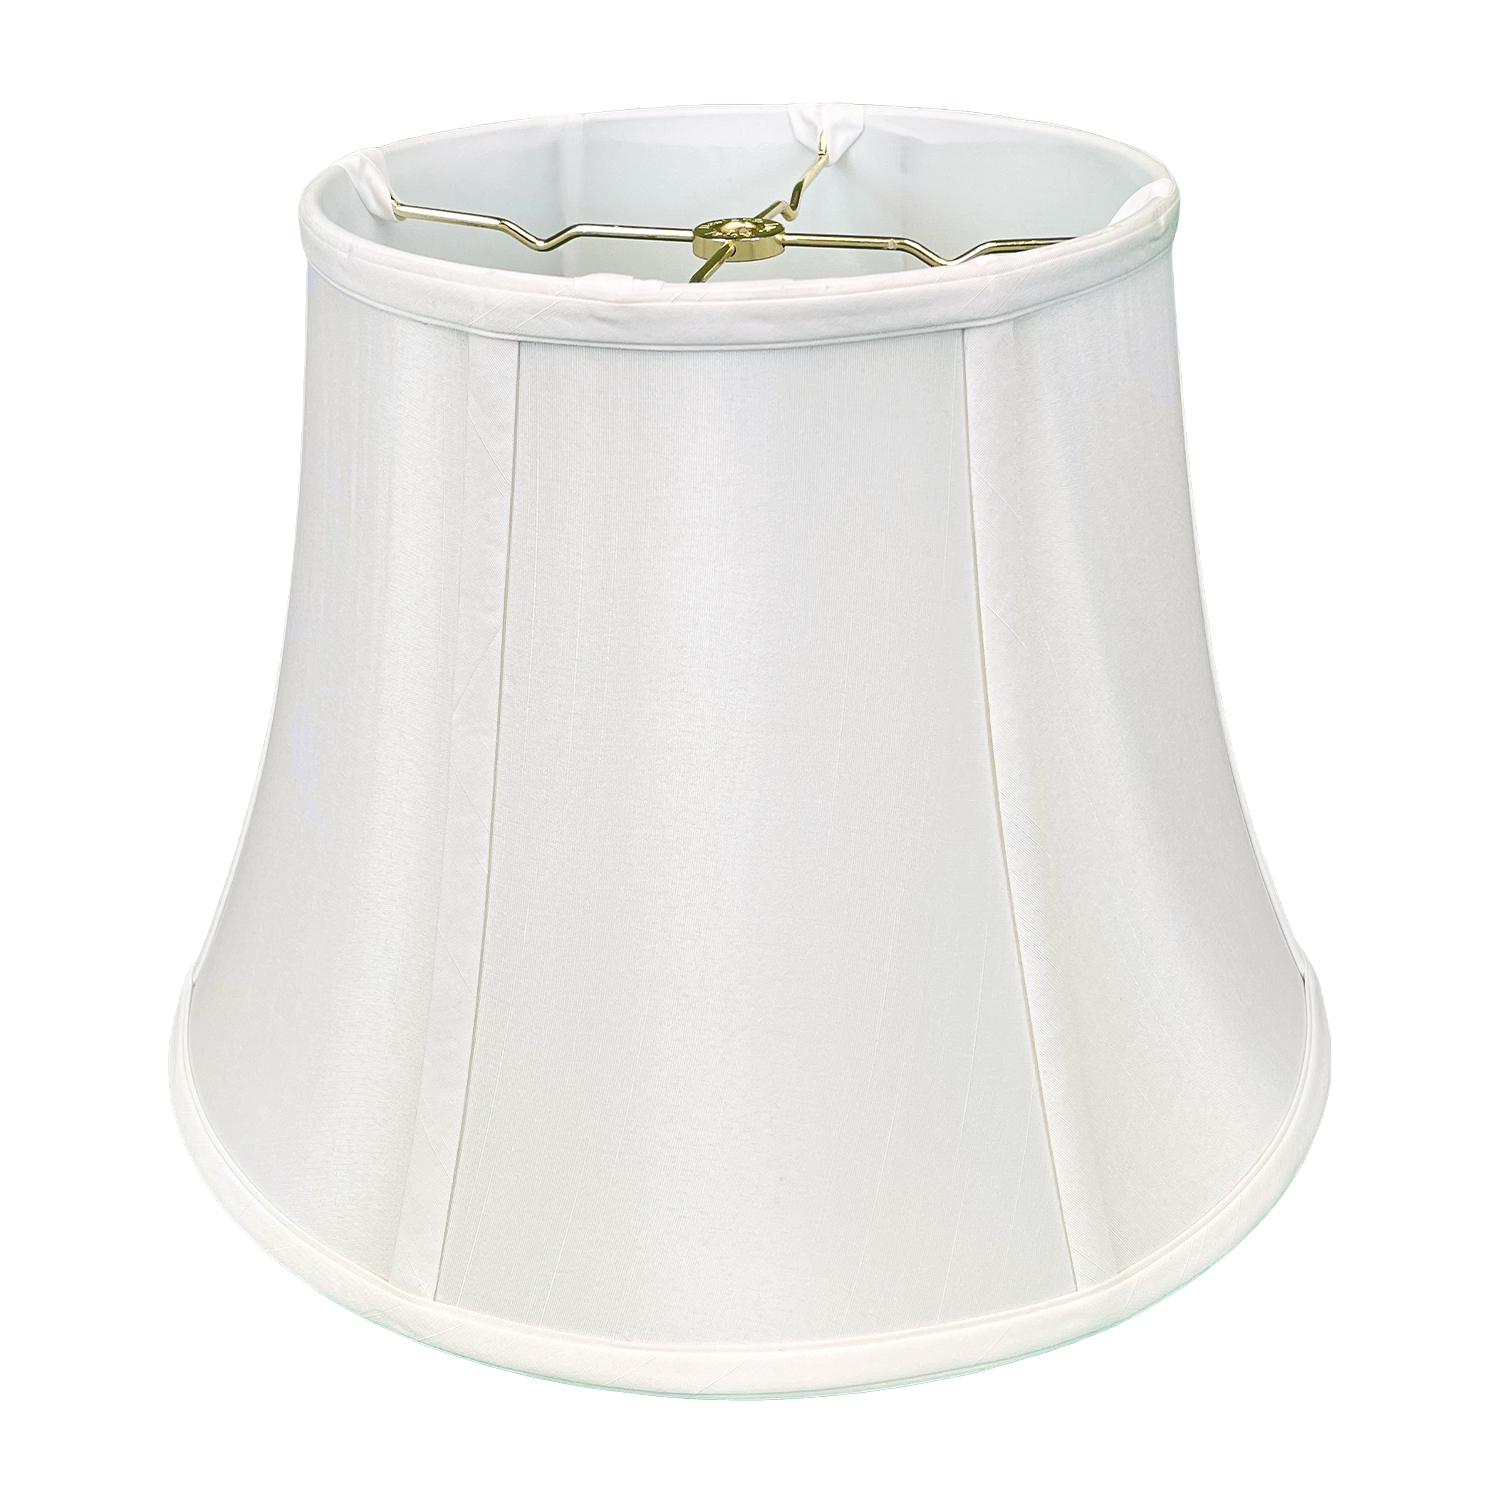 Royal Designs Modified Bell Lamp Shade - White - 10 x 16 x 12.5